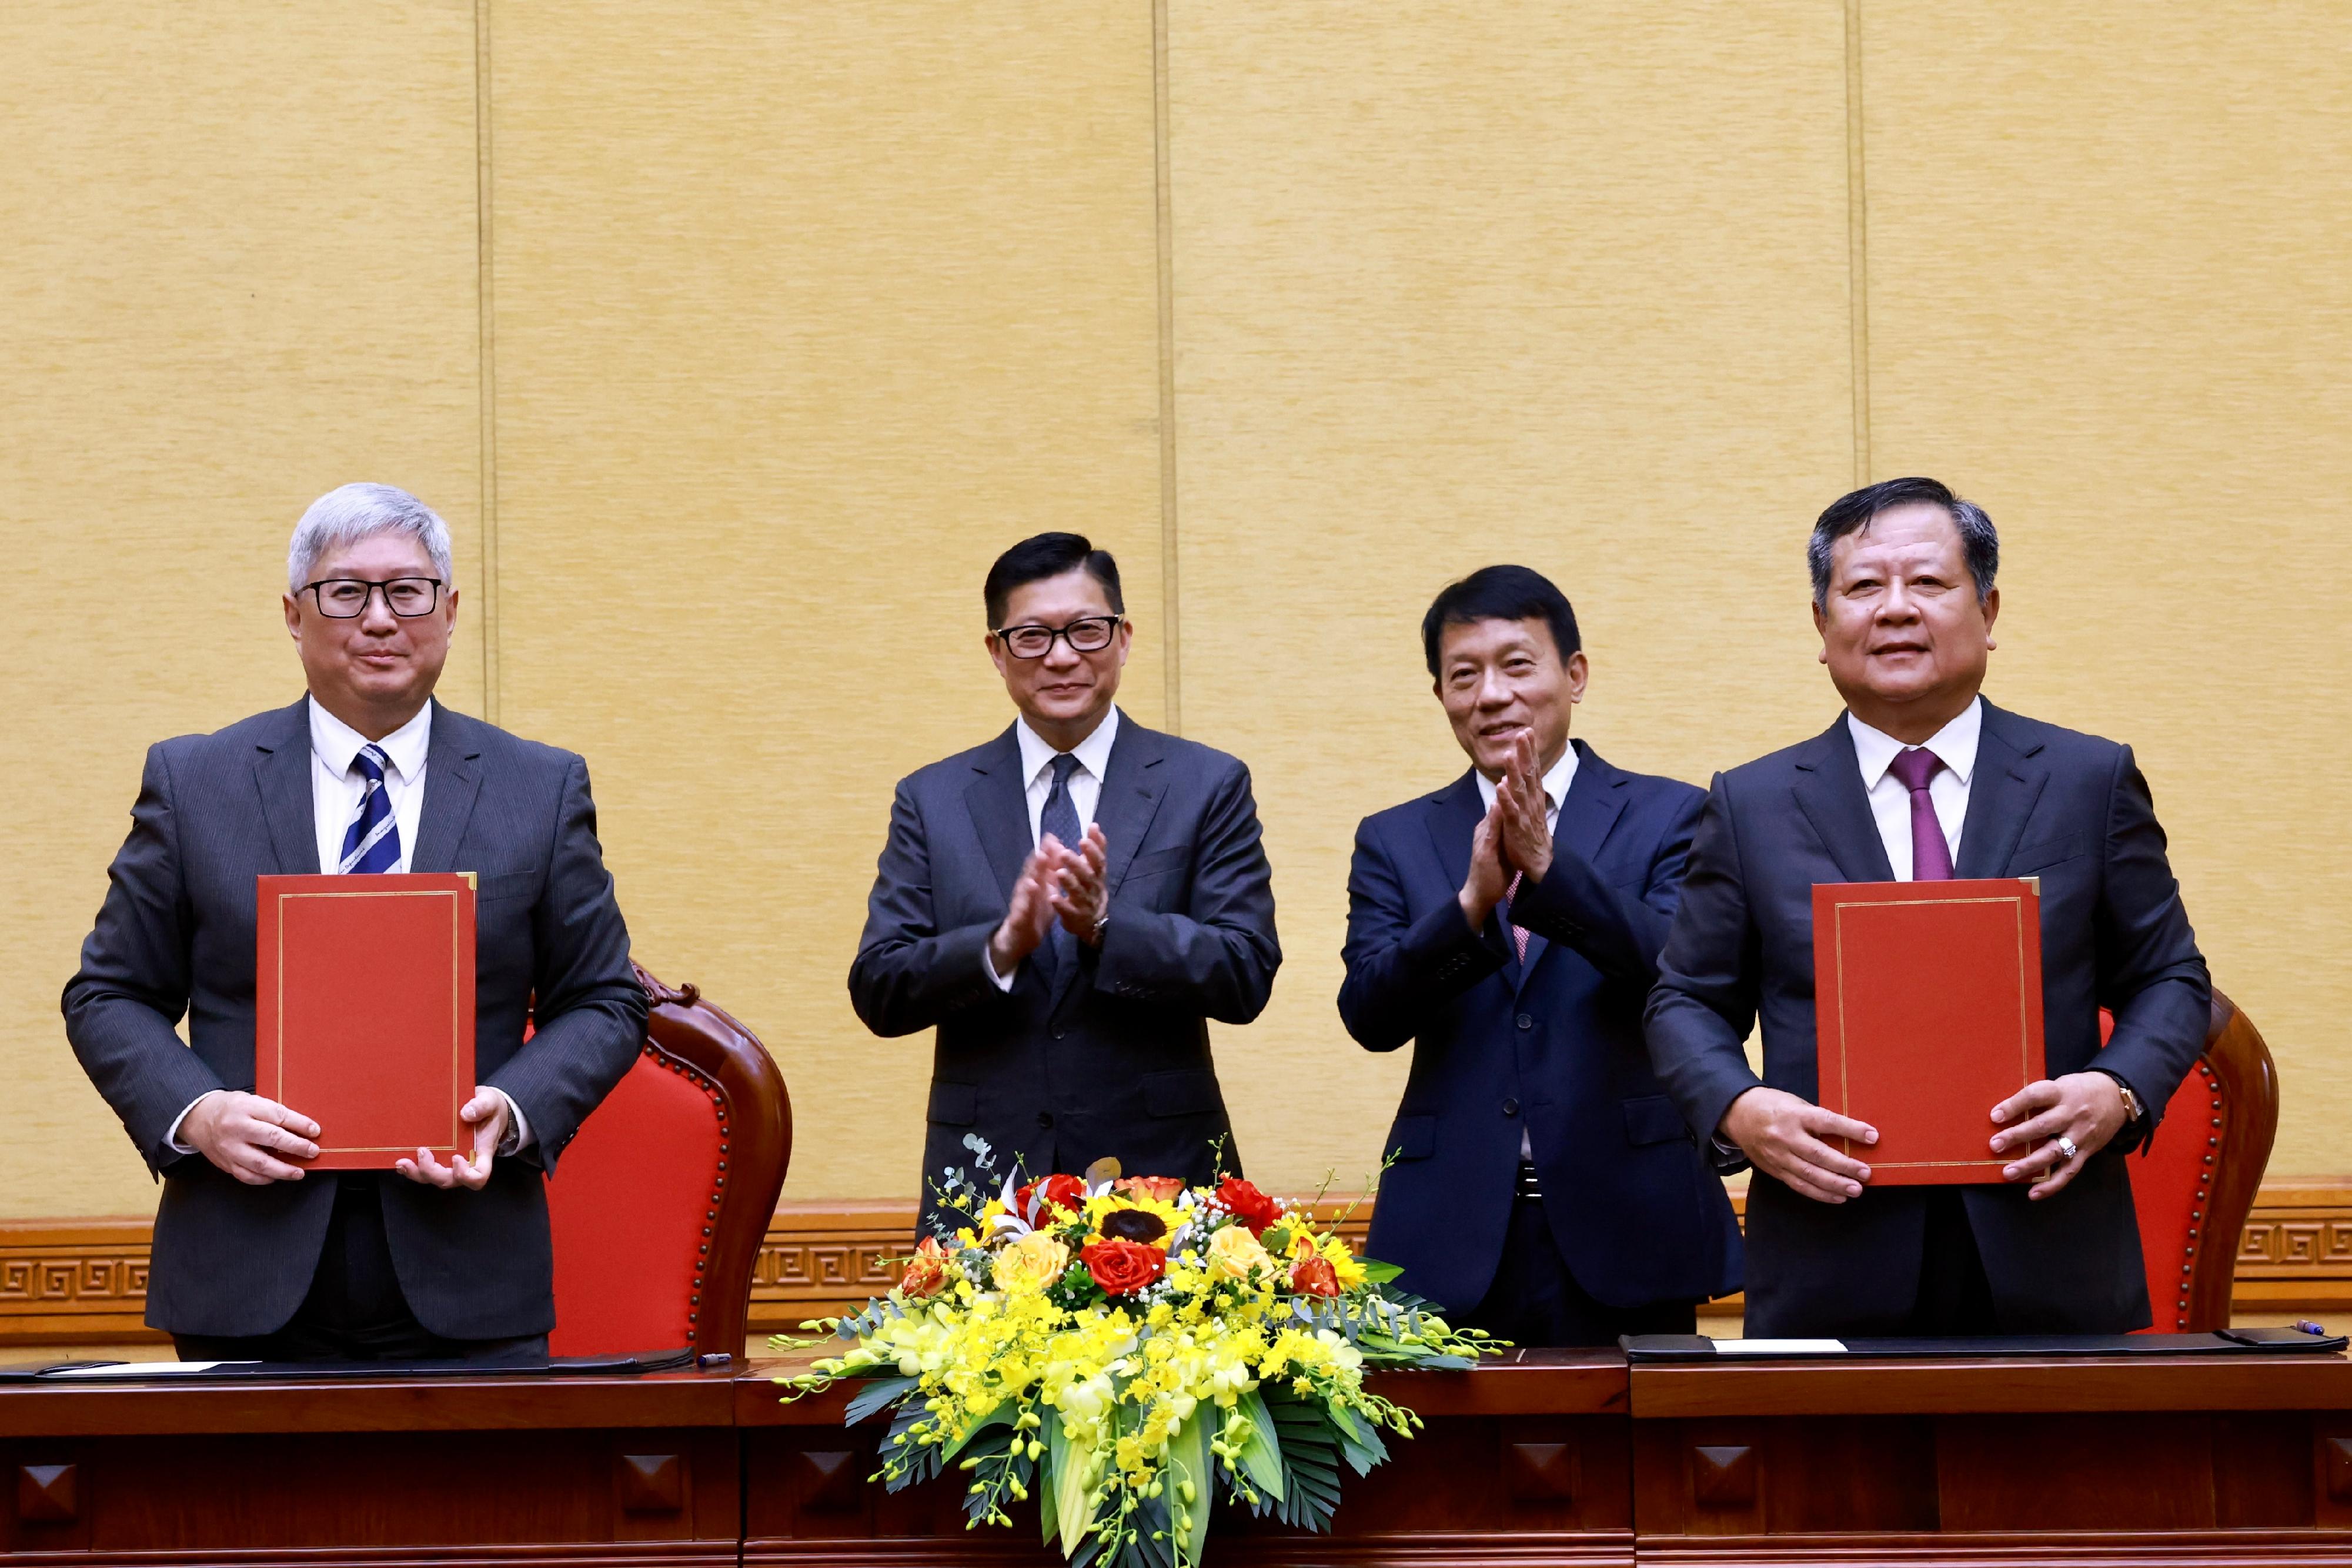 The Secretary for Security, Mr Tang Ping-keung, began his visit programme in Vietnam on August 28. Photo shows Mr Tang (back row, first left) and the Deputy Minister of Public Security of Vietnam, Senior Lieutenant General Luong Tam Quang (back row, first right), witnessing the signing of the Memorandum of Understanding by the Director of Immigration, Mr Au Ka-wang (front row, first left), and the Director General of Immigration Department of Vietnam, Mr Pham Dang Khoa (front row, first right), on enhancing co-operation in respect of immigration matters of the two places.